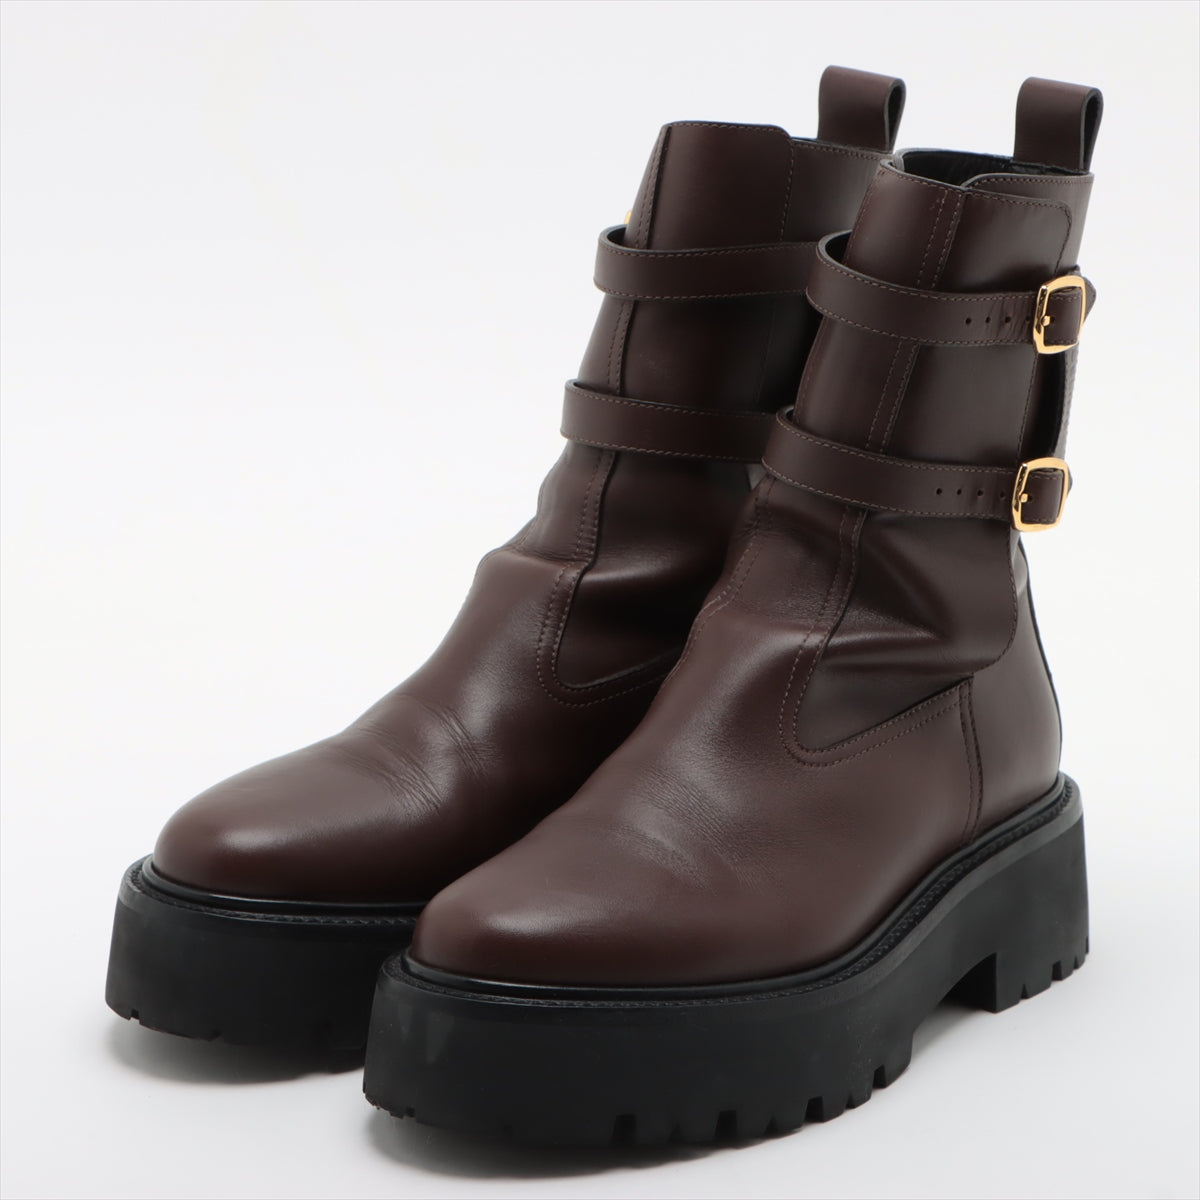 CELINE Leather Short Boots 39 Ladies' Brown box There is a bag